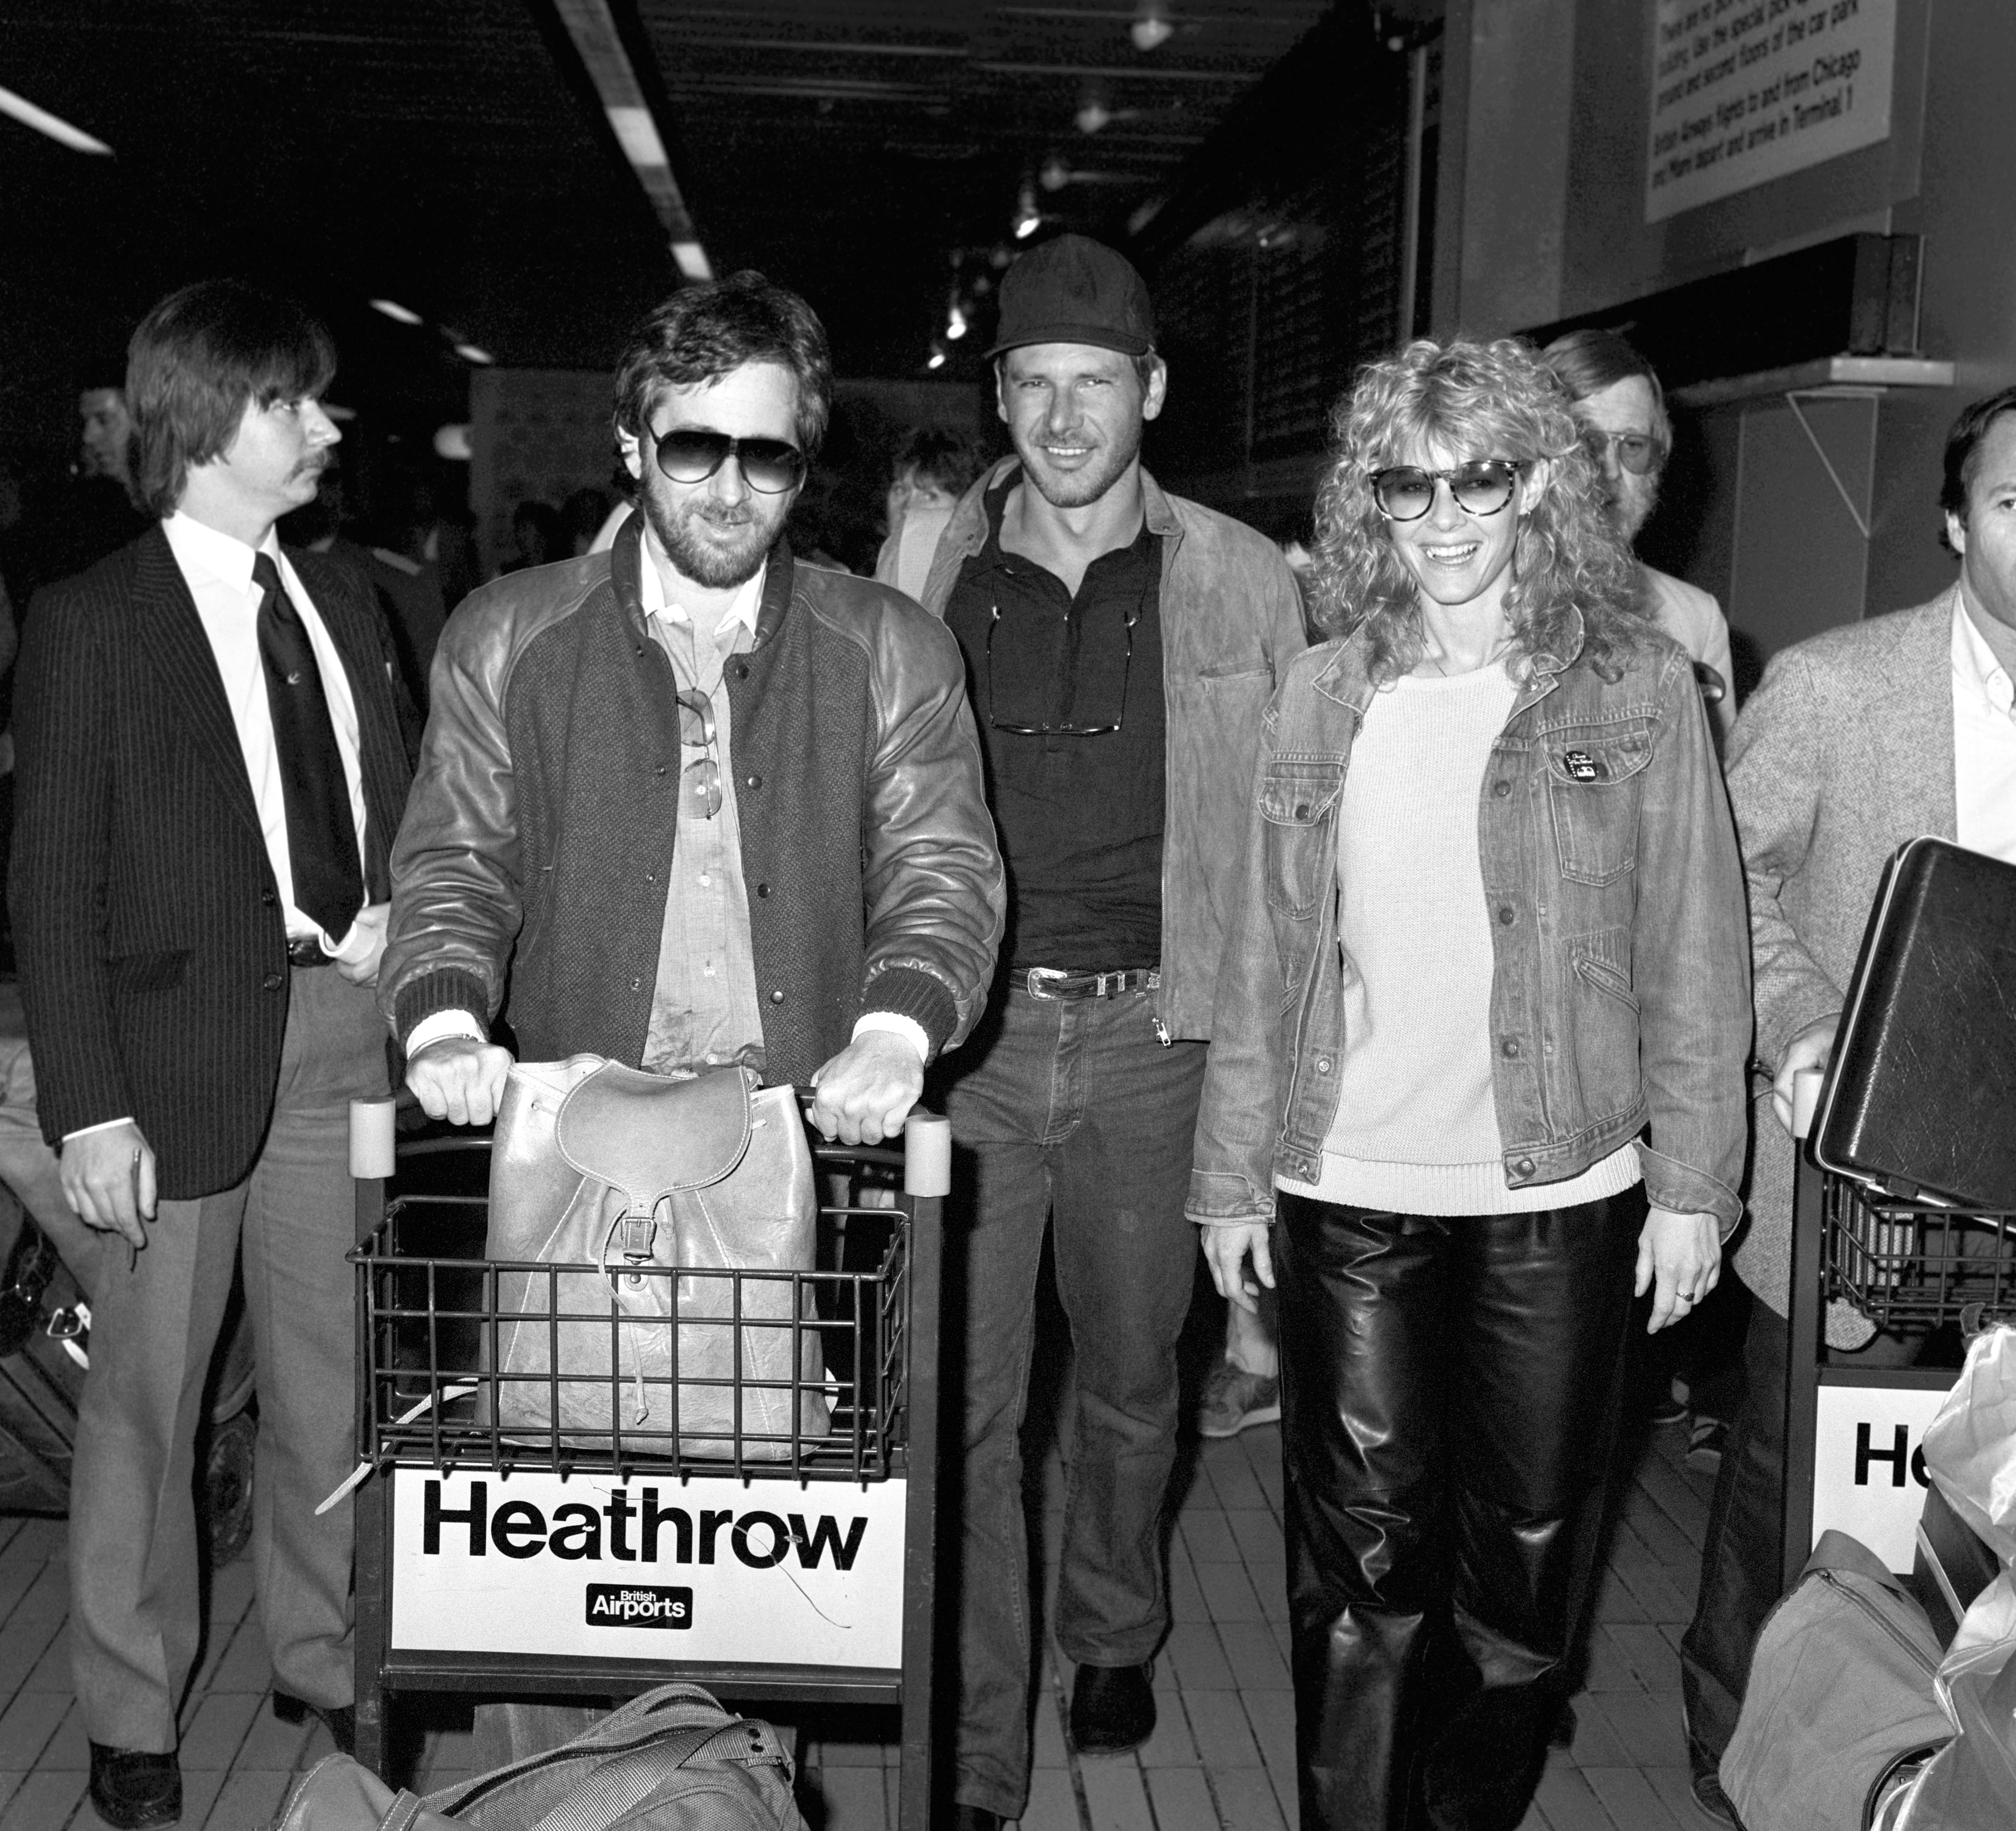 Director Stephen Spielberg (left) arriving at Heathrow airport with Harrison Ford and Kate Capshaw.